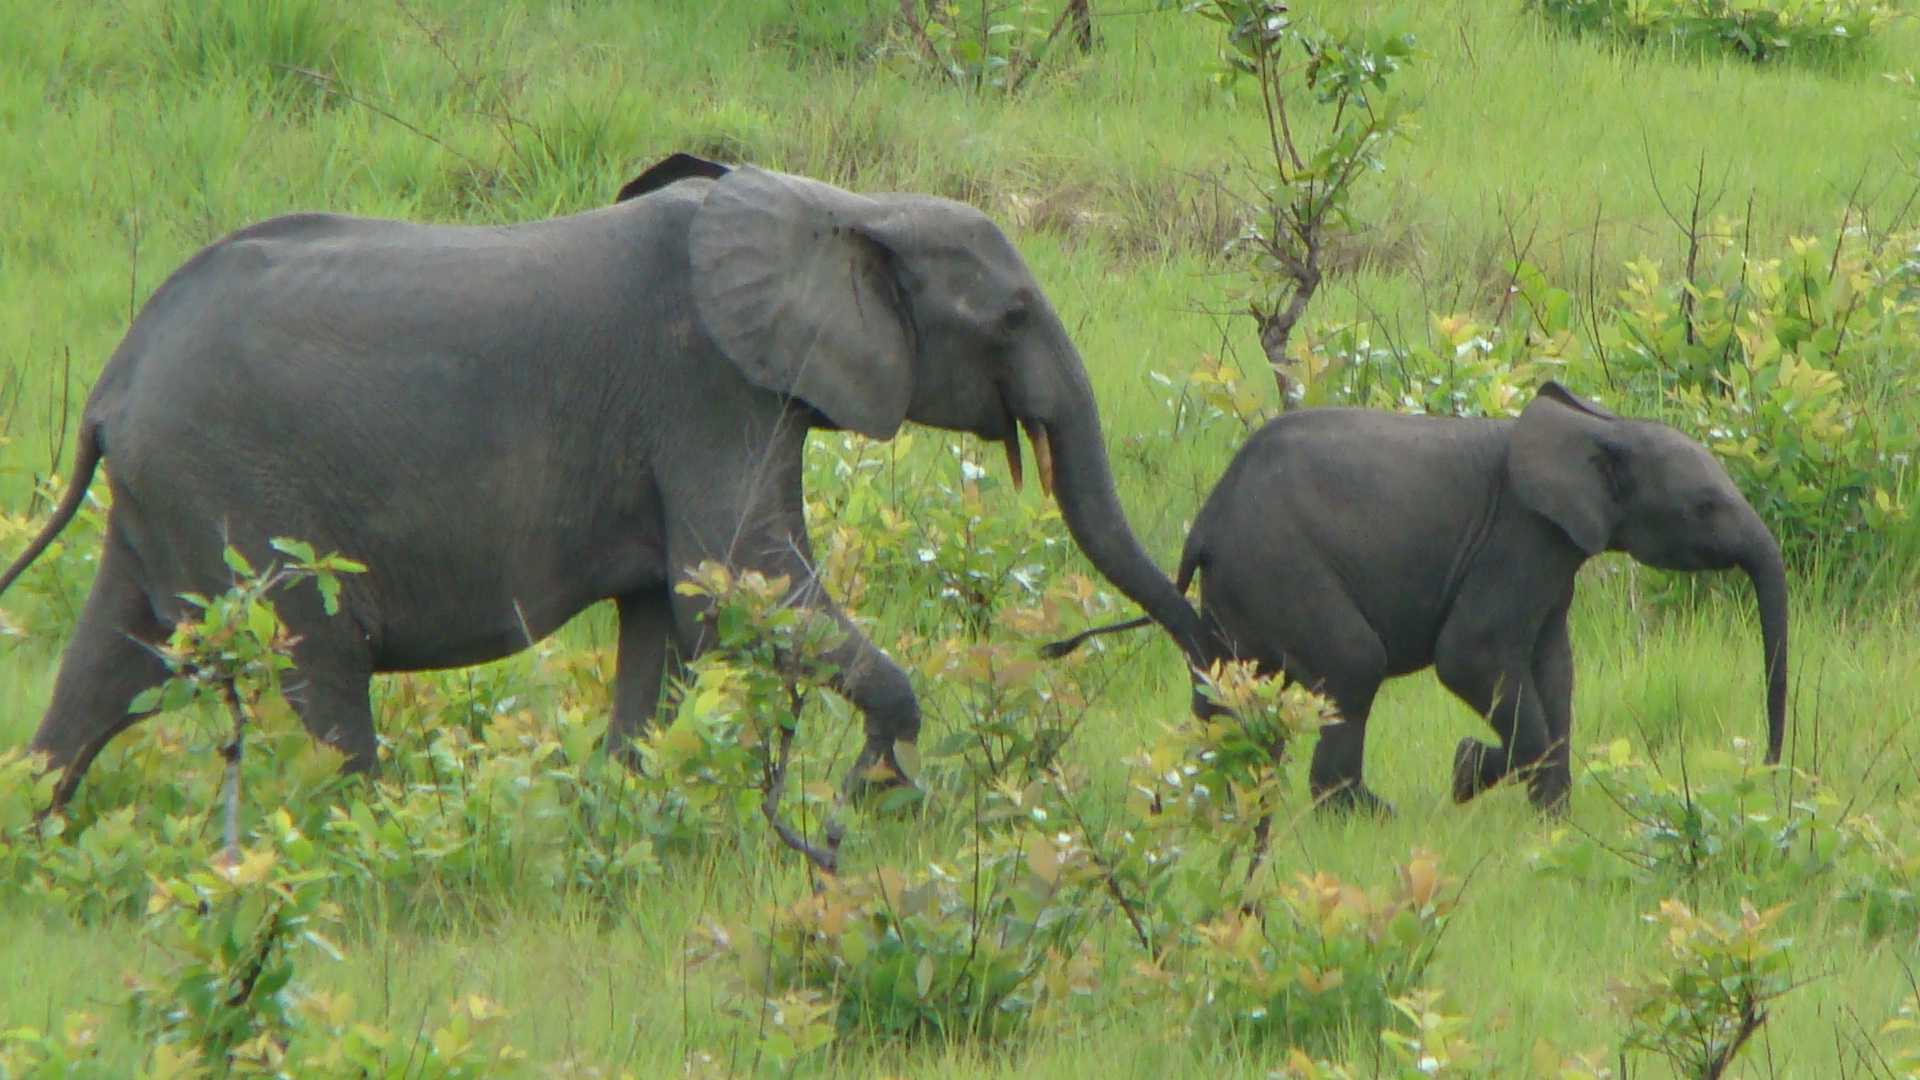 Forest elephant mother and calf